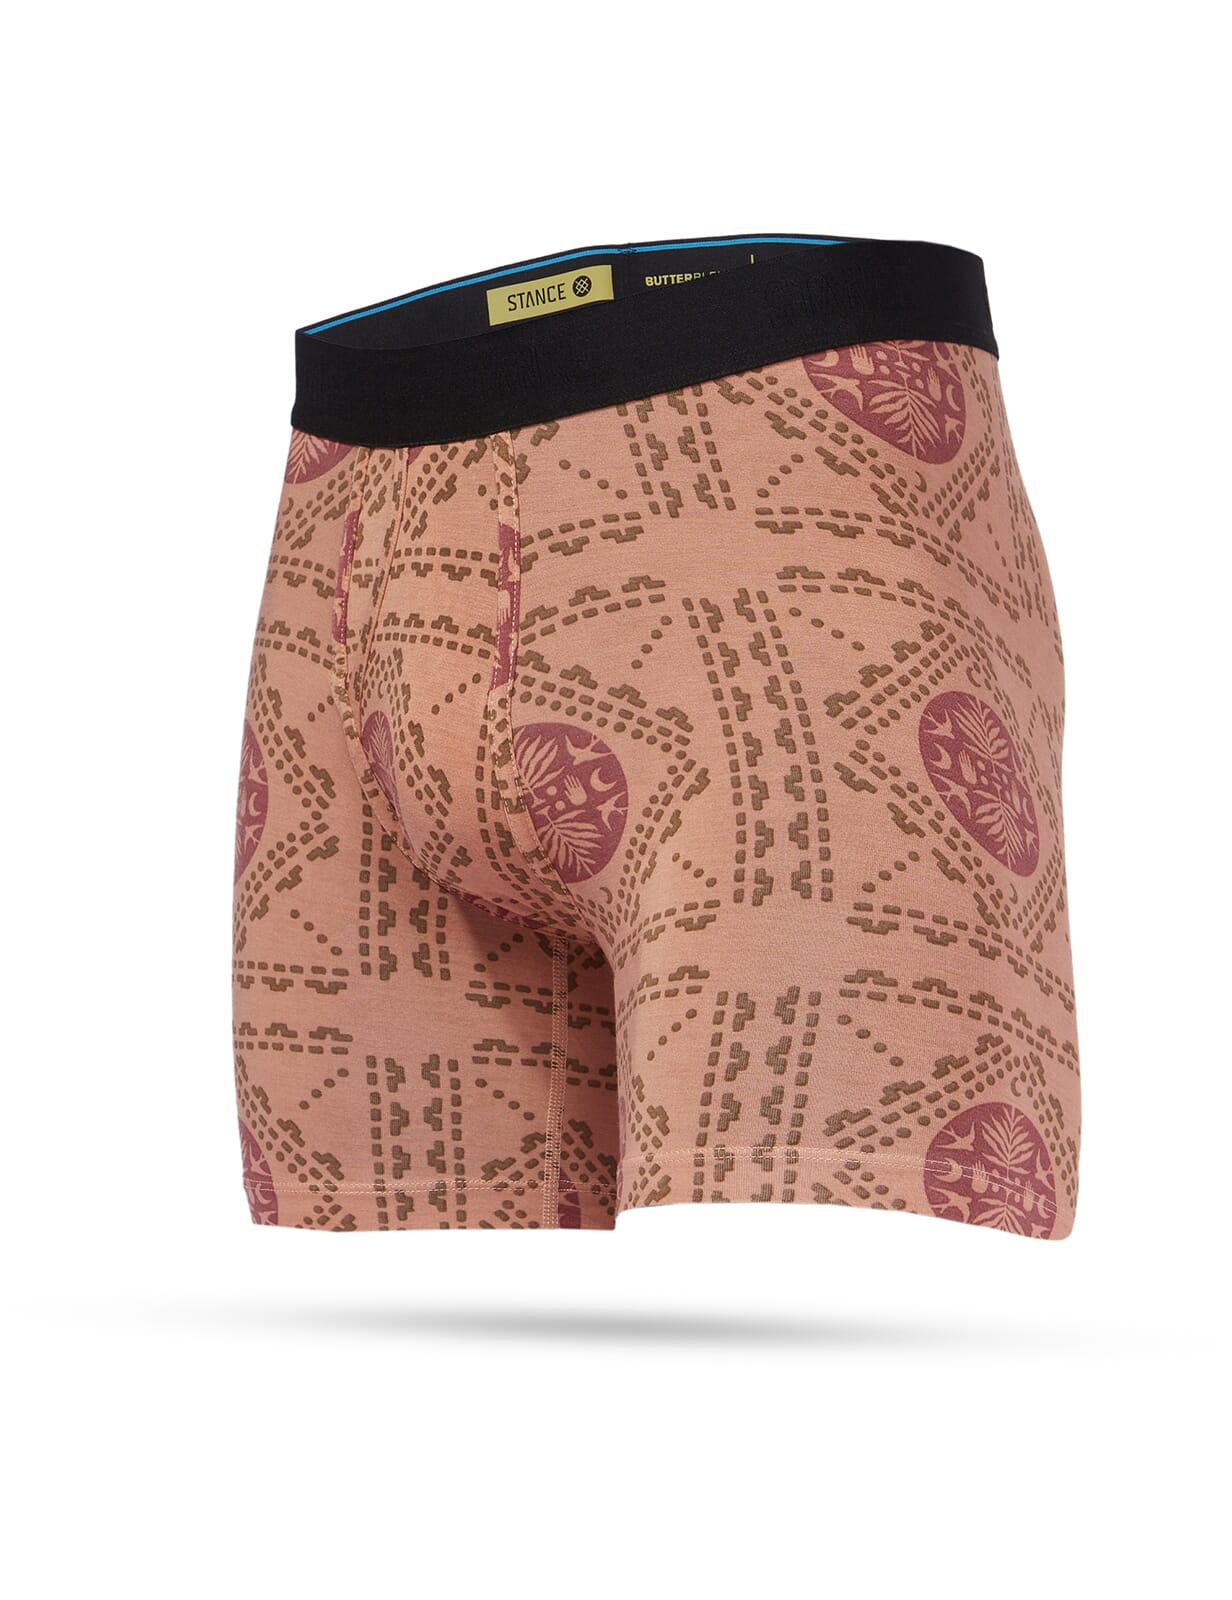 https://assets.hardcloud.com/media/catalog/product/s/t/stance-new-moon-wholester-boxers-peach-m901a23new-pea-b_5zexxbogribafbfk.jpg